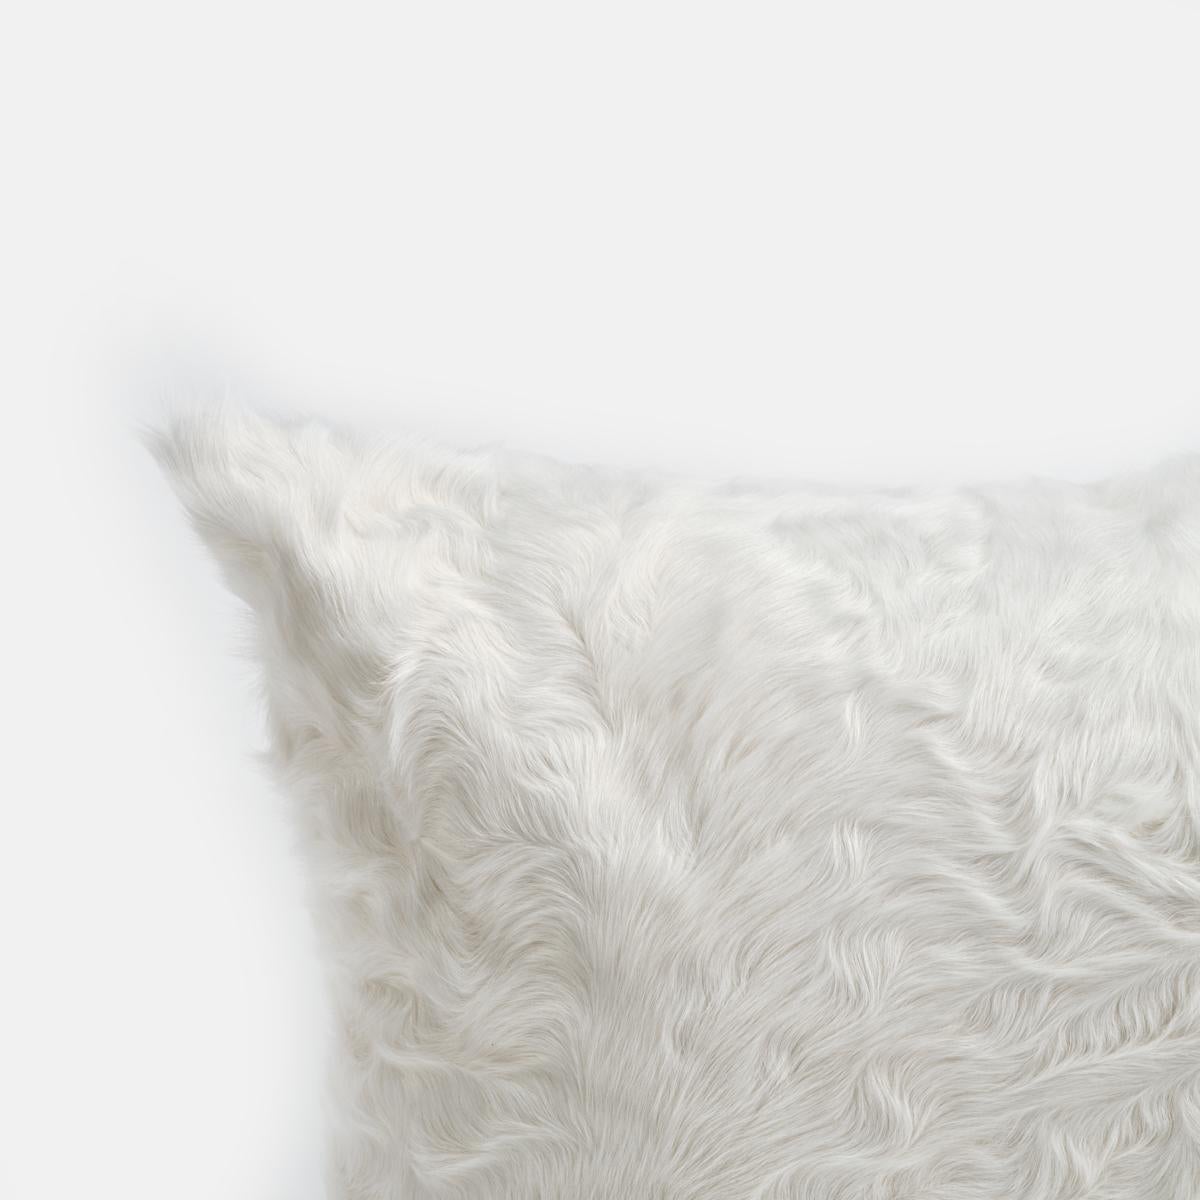 Hand-Crafted Waves White Xiangao Lamb Fur Pillow Cushion by Muchi Decor For Sale